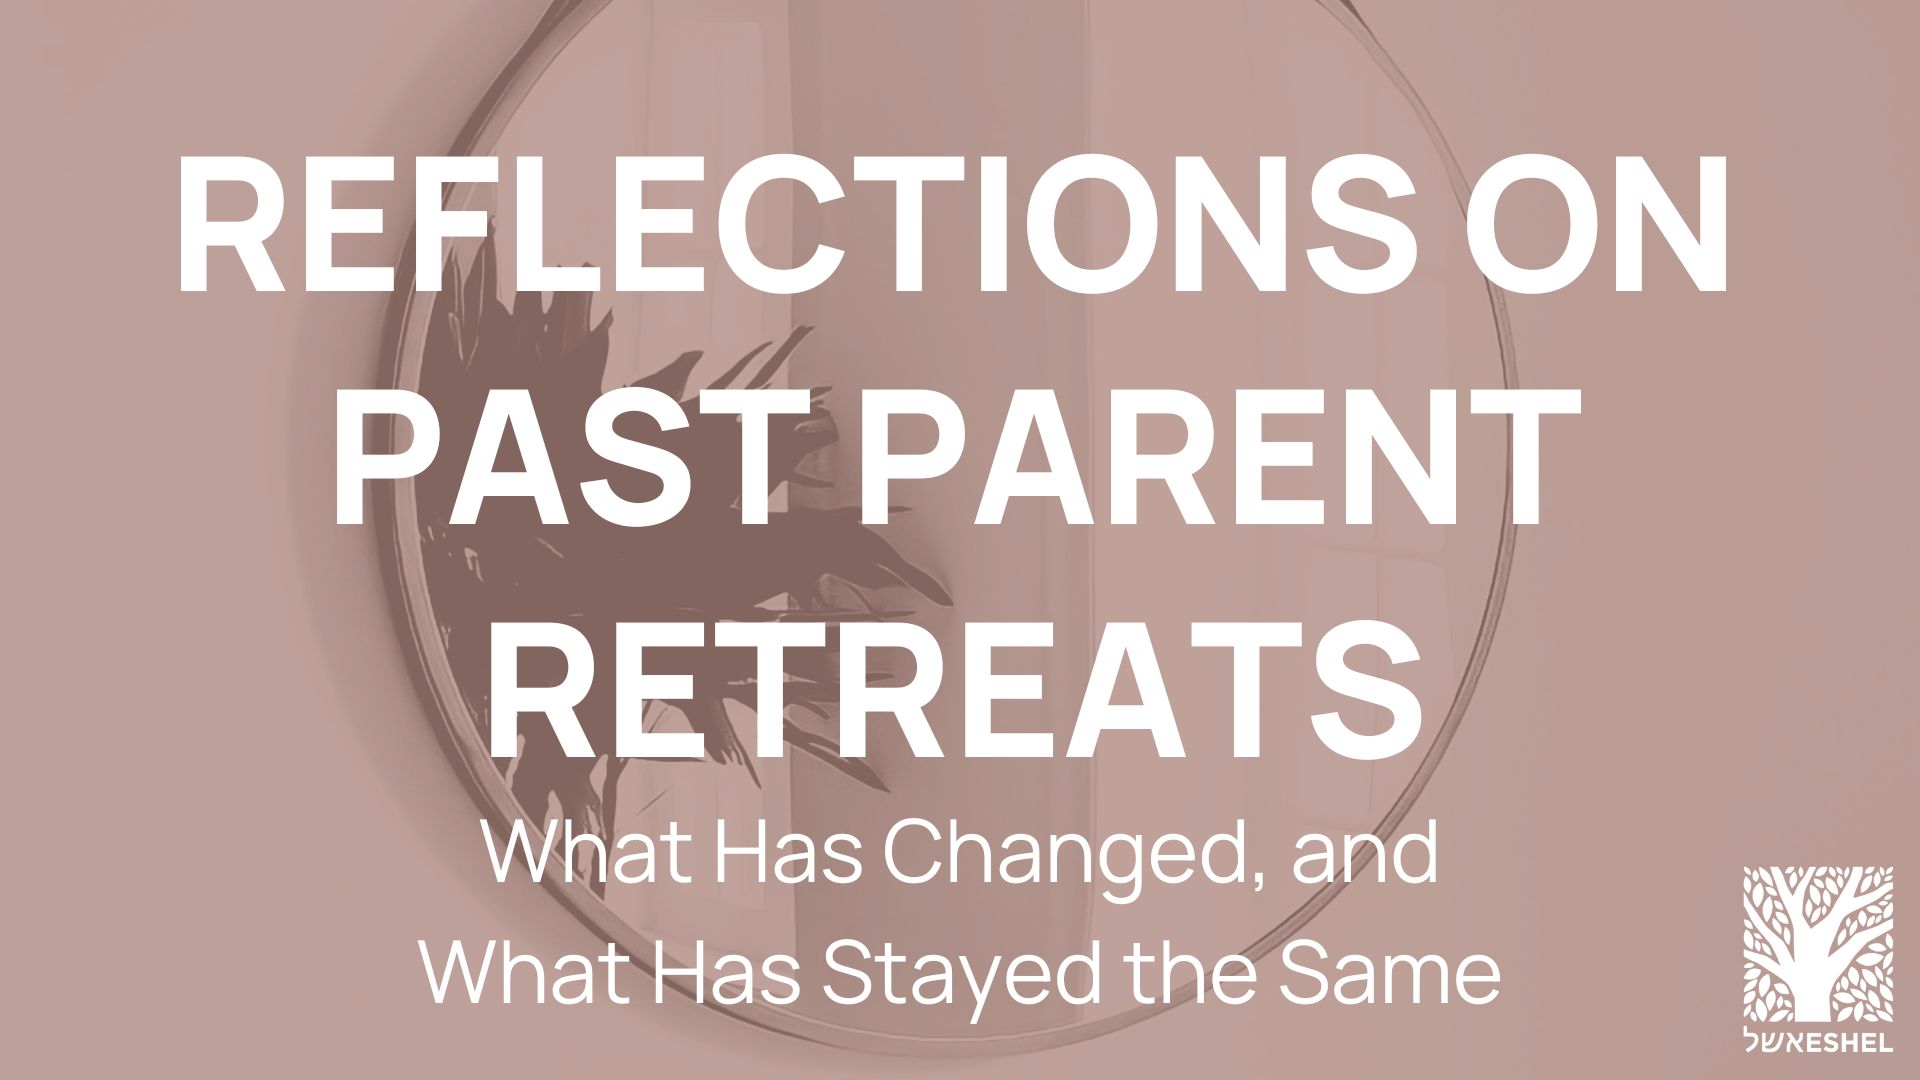 Reflections on Past Parent Retreats: What Has Changed, What Has Stayed the Same